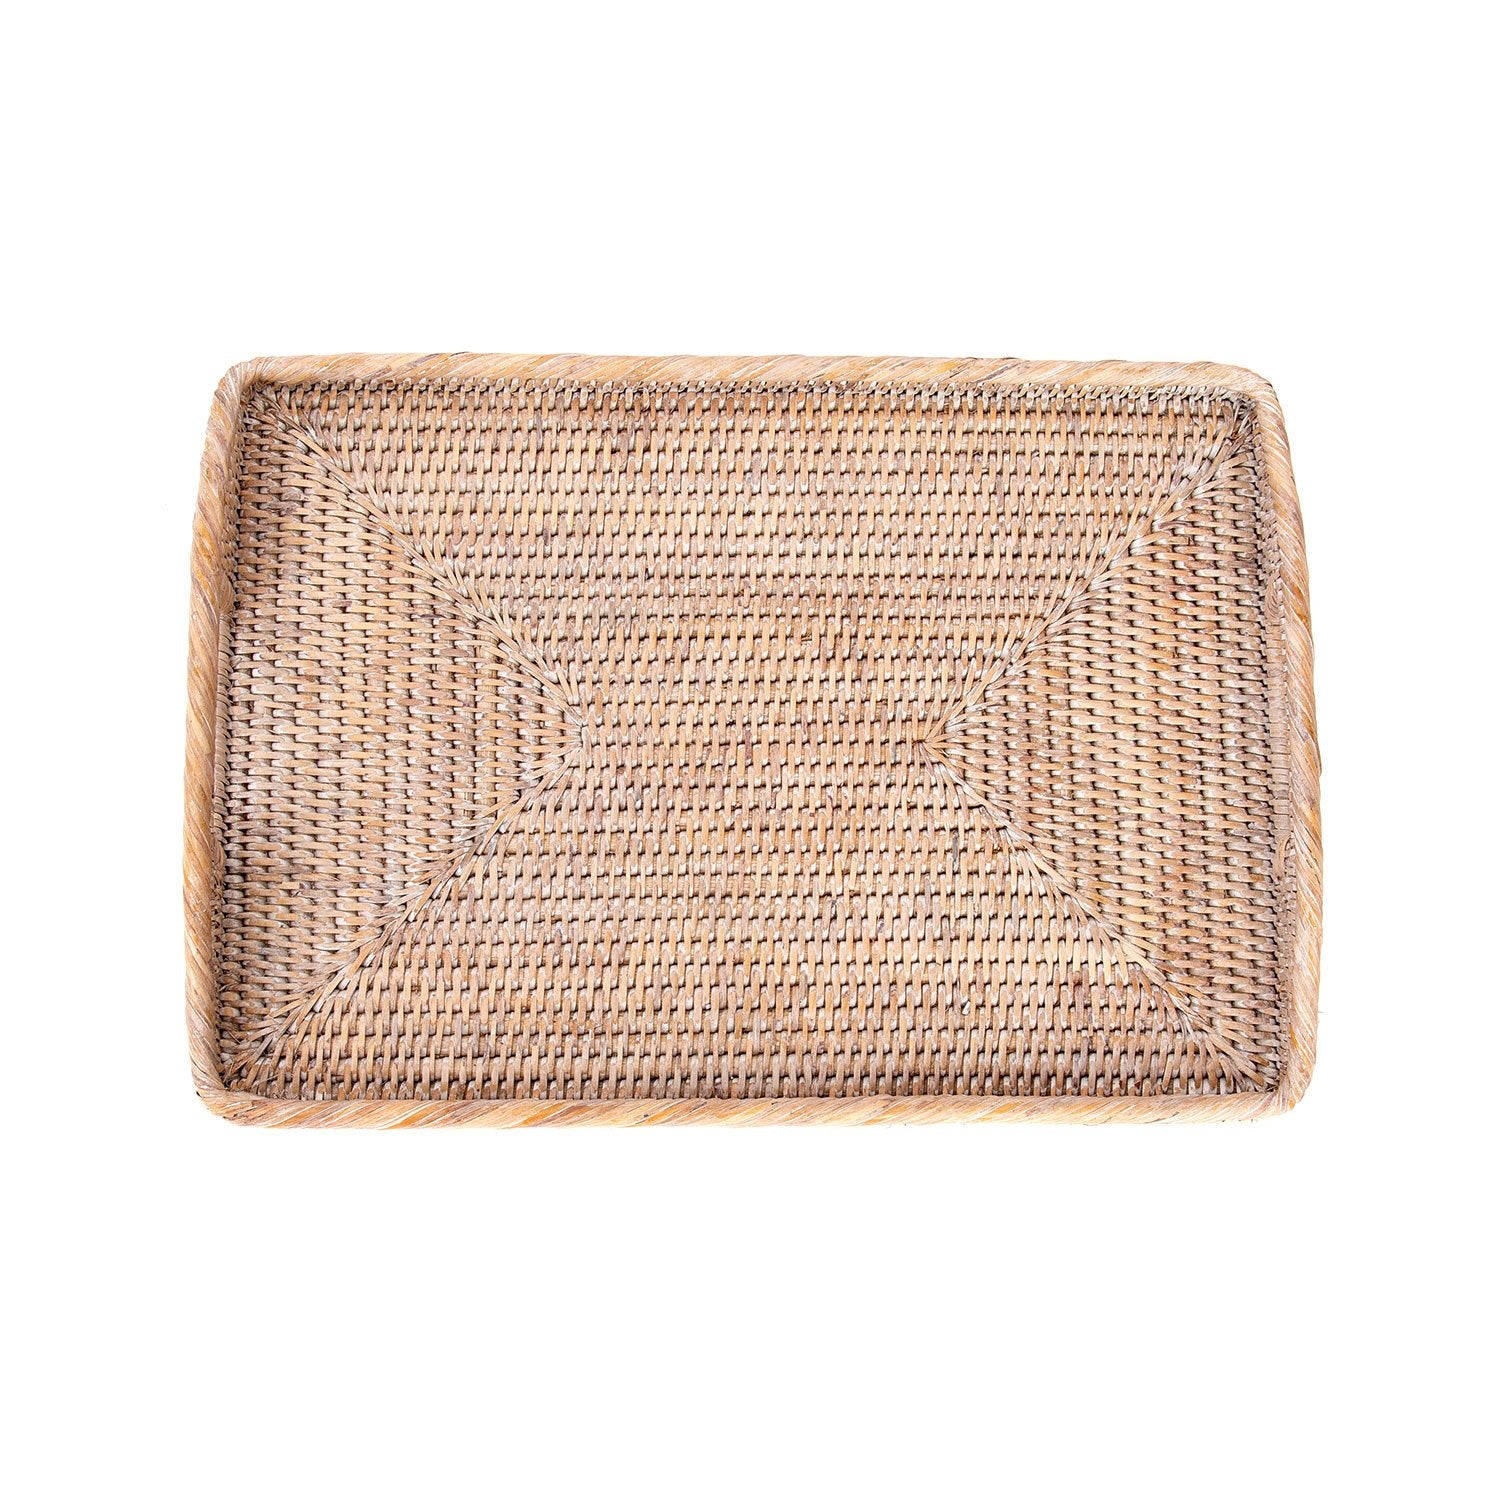 Medium Woven Tray with Handles in Whitewash